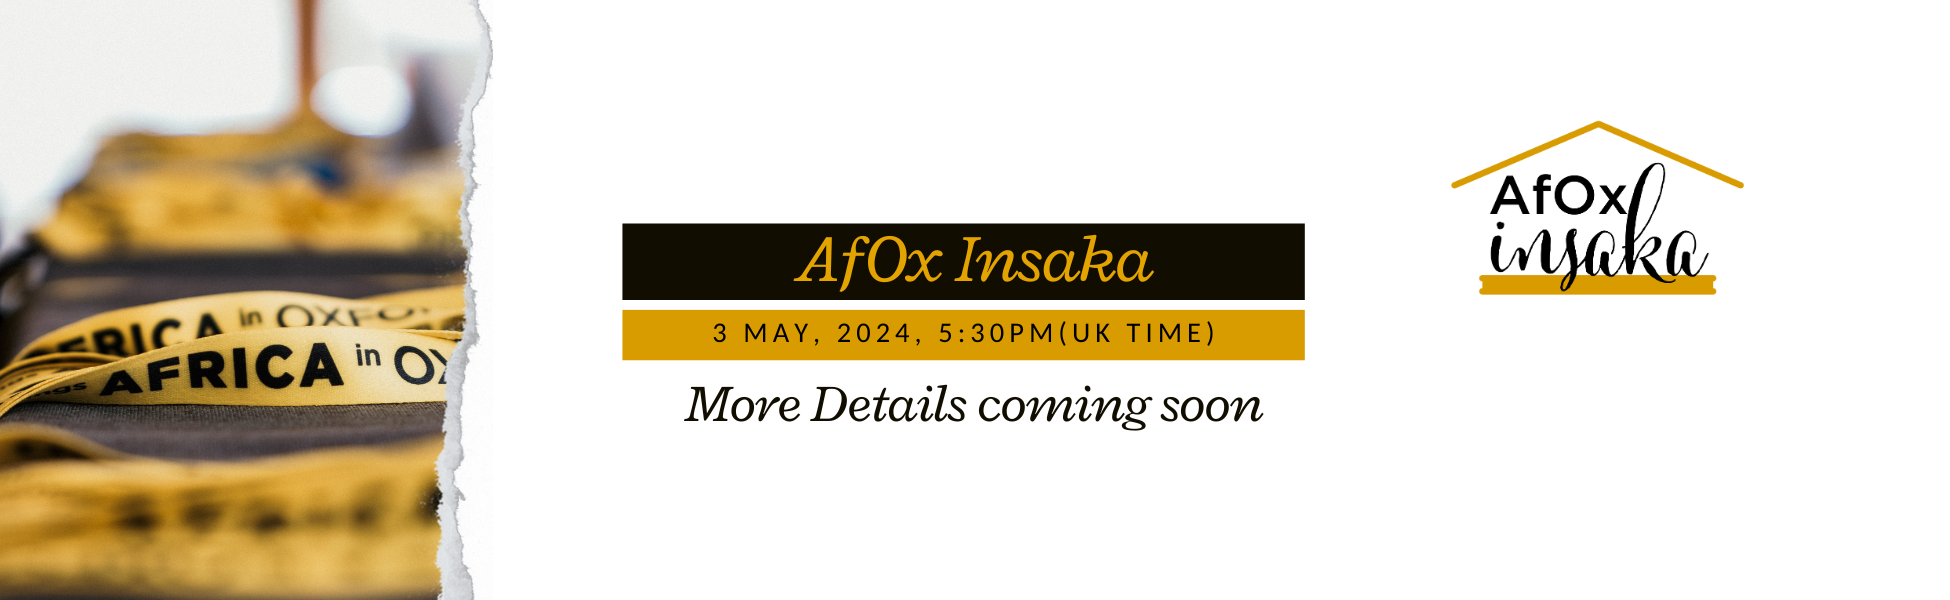 The image is a promotional banner for an event titled "AfOx Insaka," scheduled for May 3, 2024, at 5:30 PM UK time. The design includes a torn paper effect and features gold and black colors with a logo resembling a house. The banner indicates that more details will be provided soon and includes lanyards with "AFRICA in OXFORD" printed on them, suggesting a connection to African topics in Oxford.